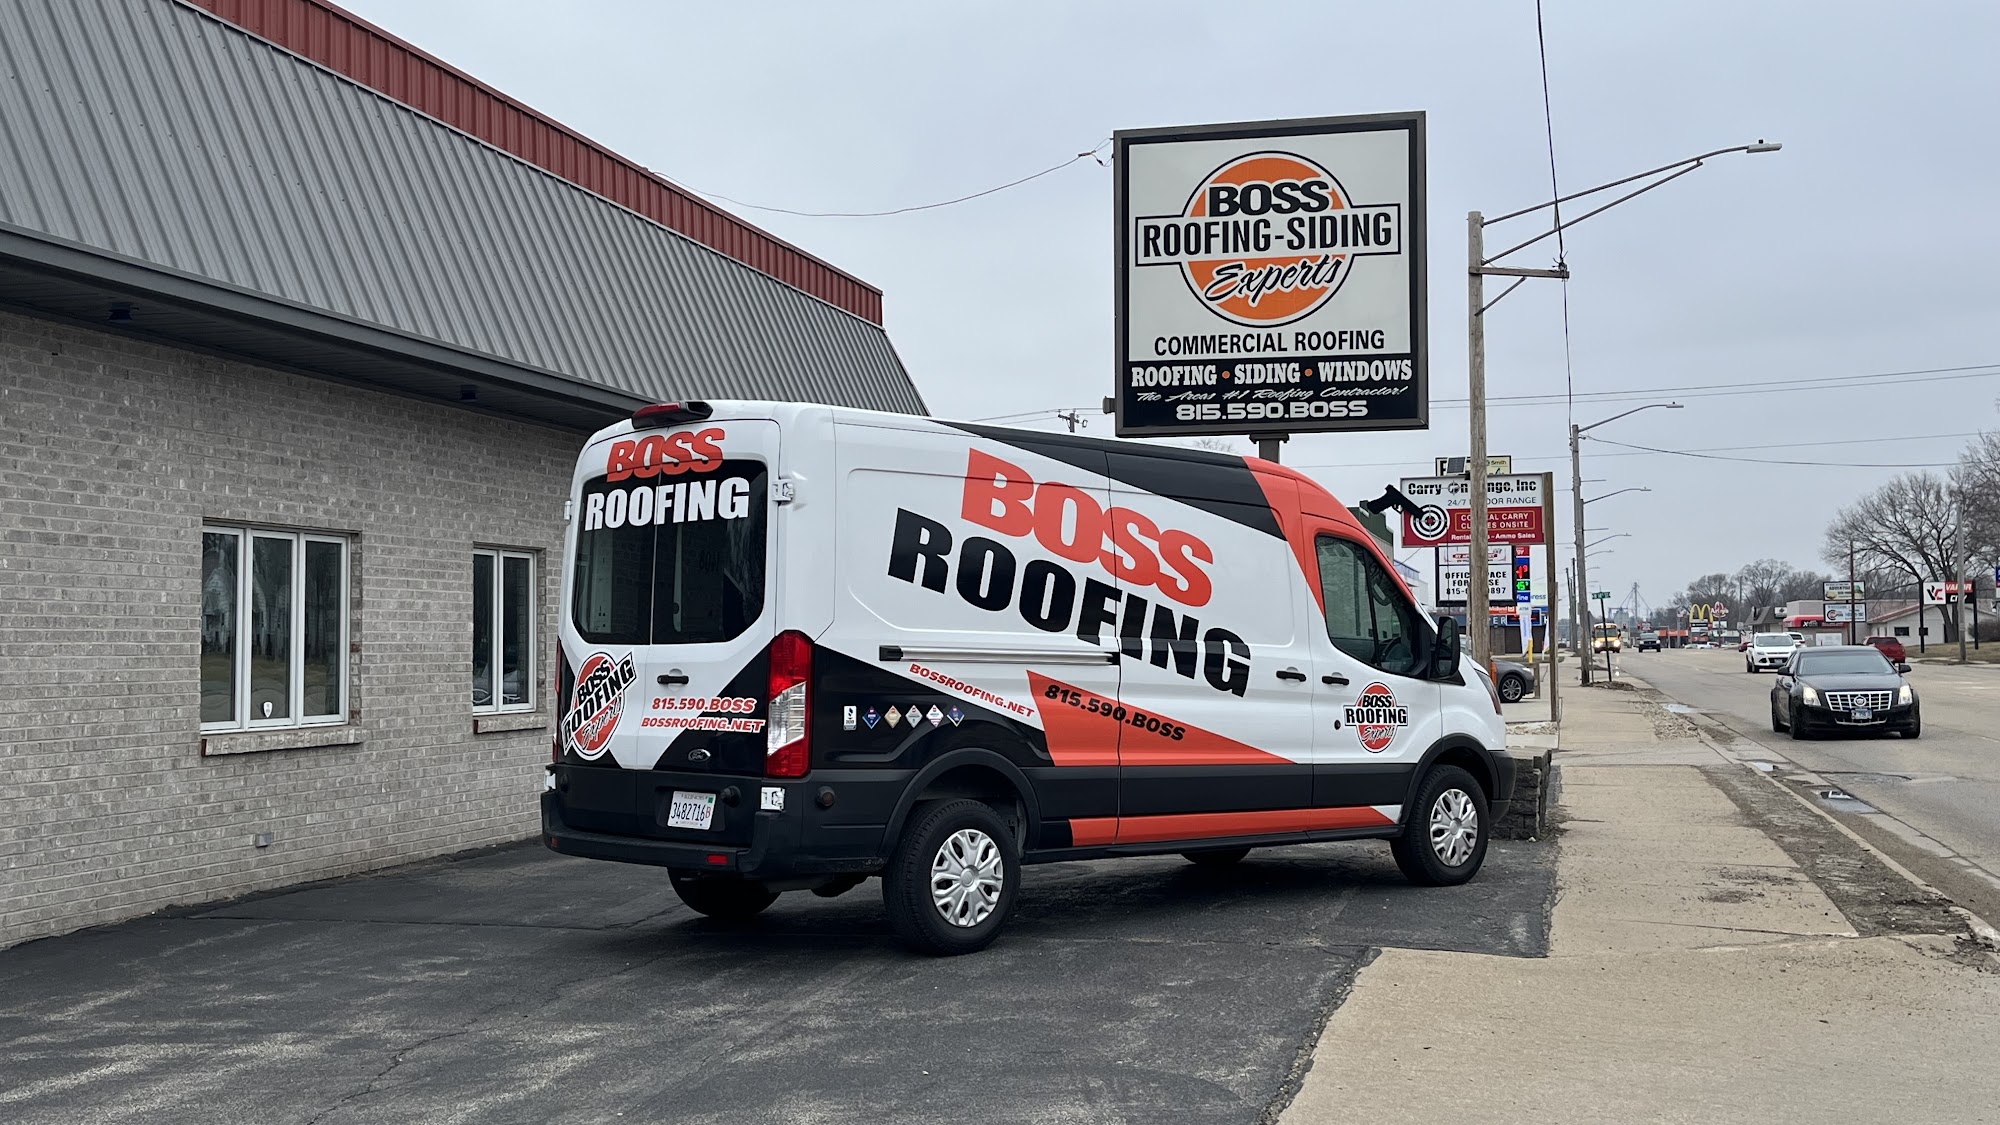 Boss Roofing - Siding Experts 1408 1st Ave, Rock Falls Illinois 61071